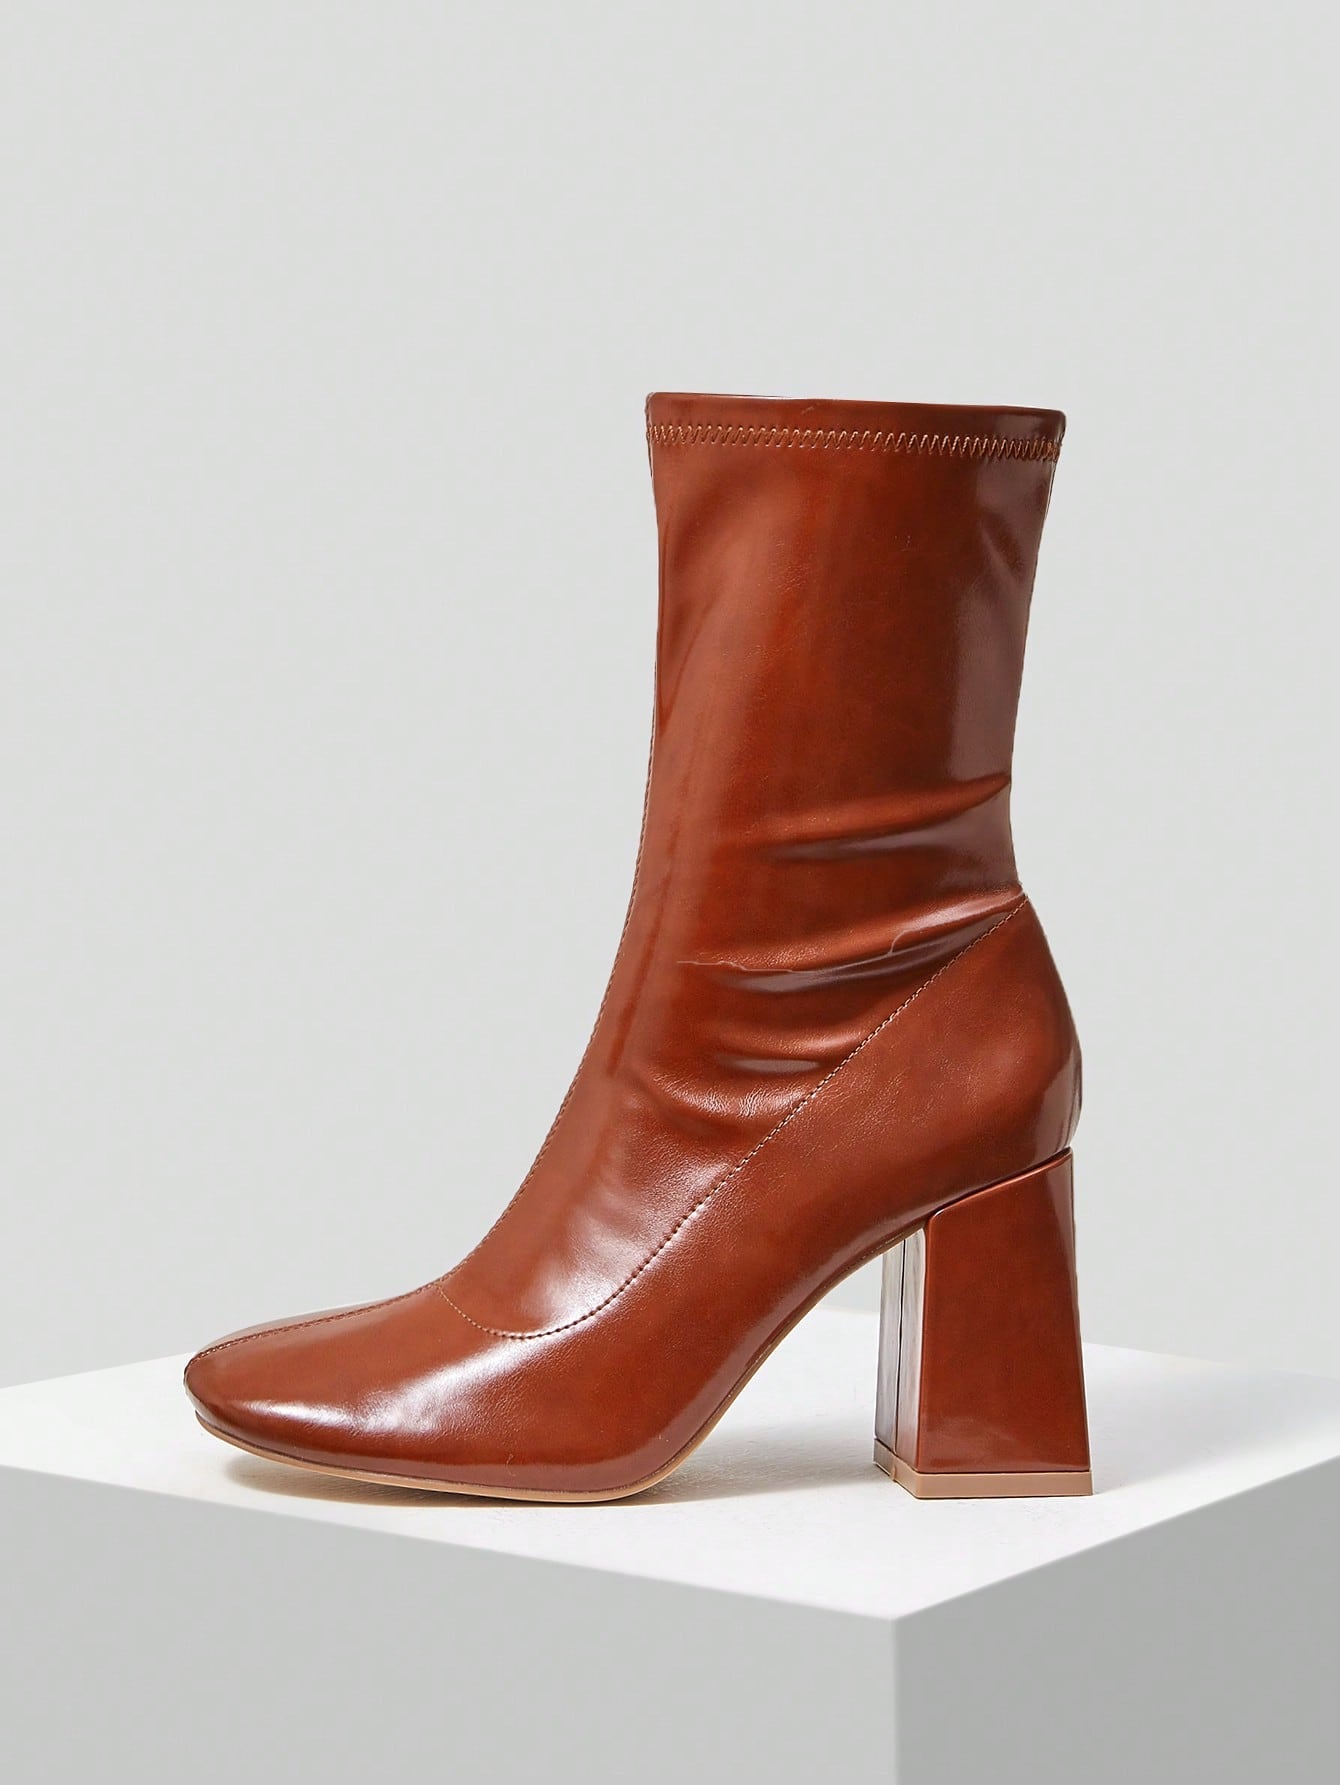 CLASSIC WOMEN'S SQUARE TOE BOOTS, FASHIONABLE AND VERSATILE FOR SUMMER